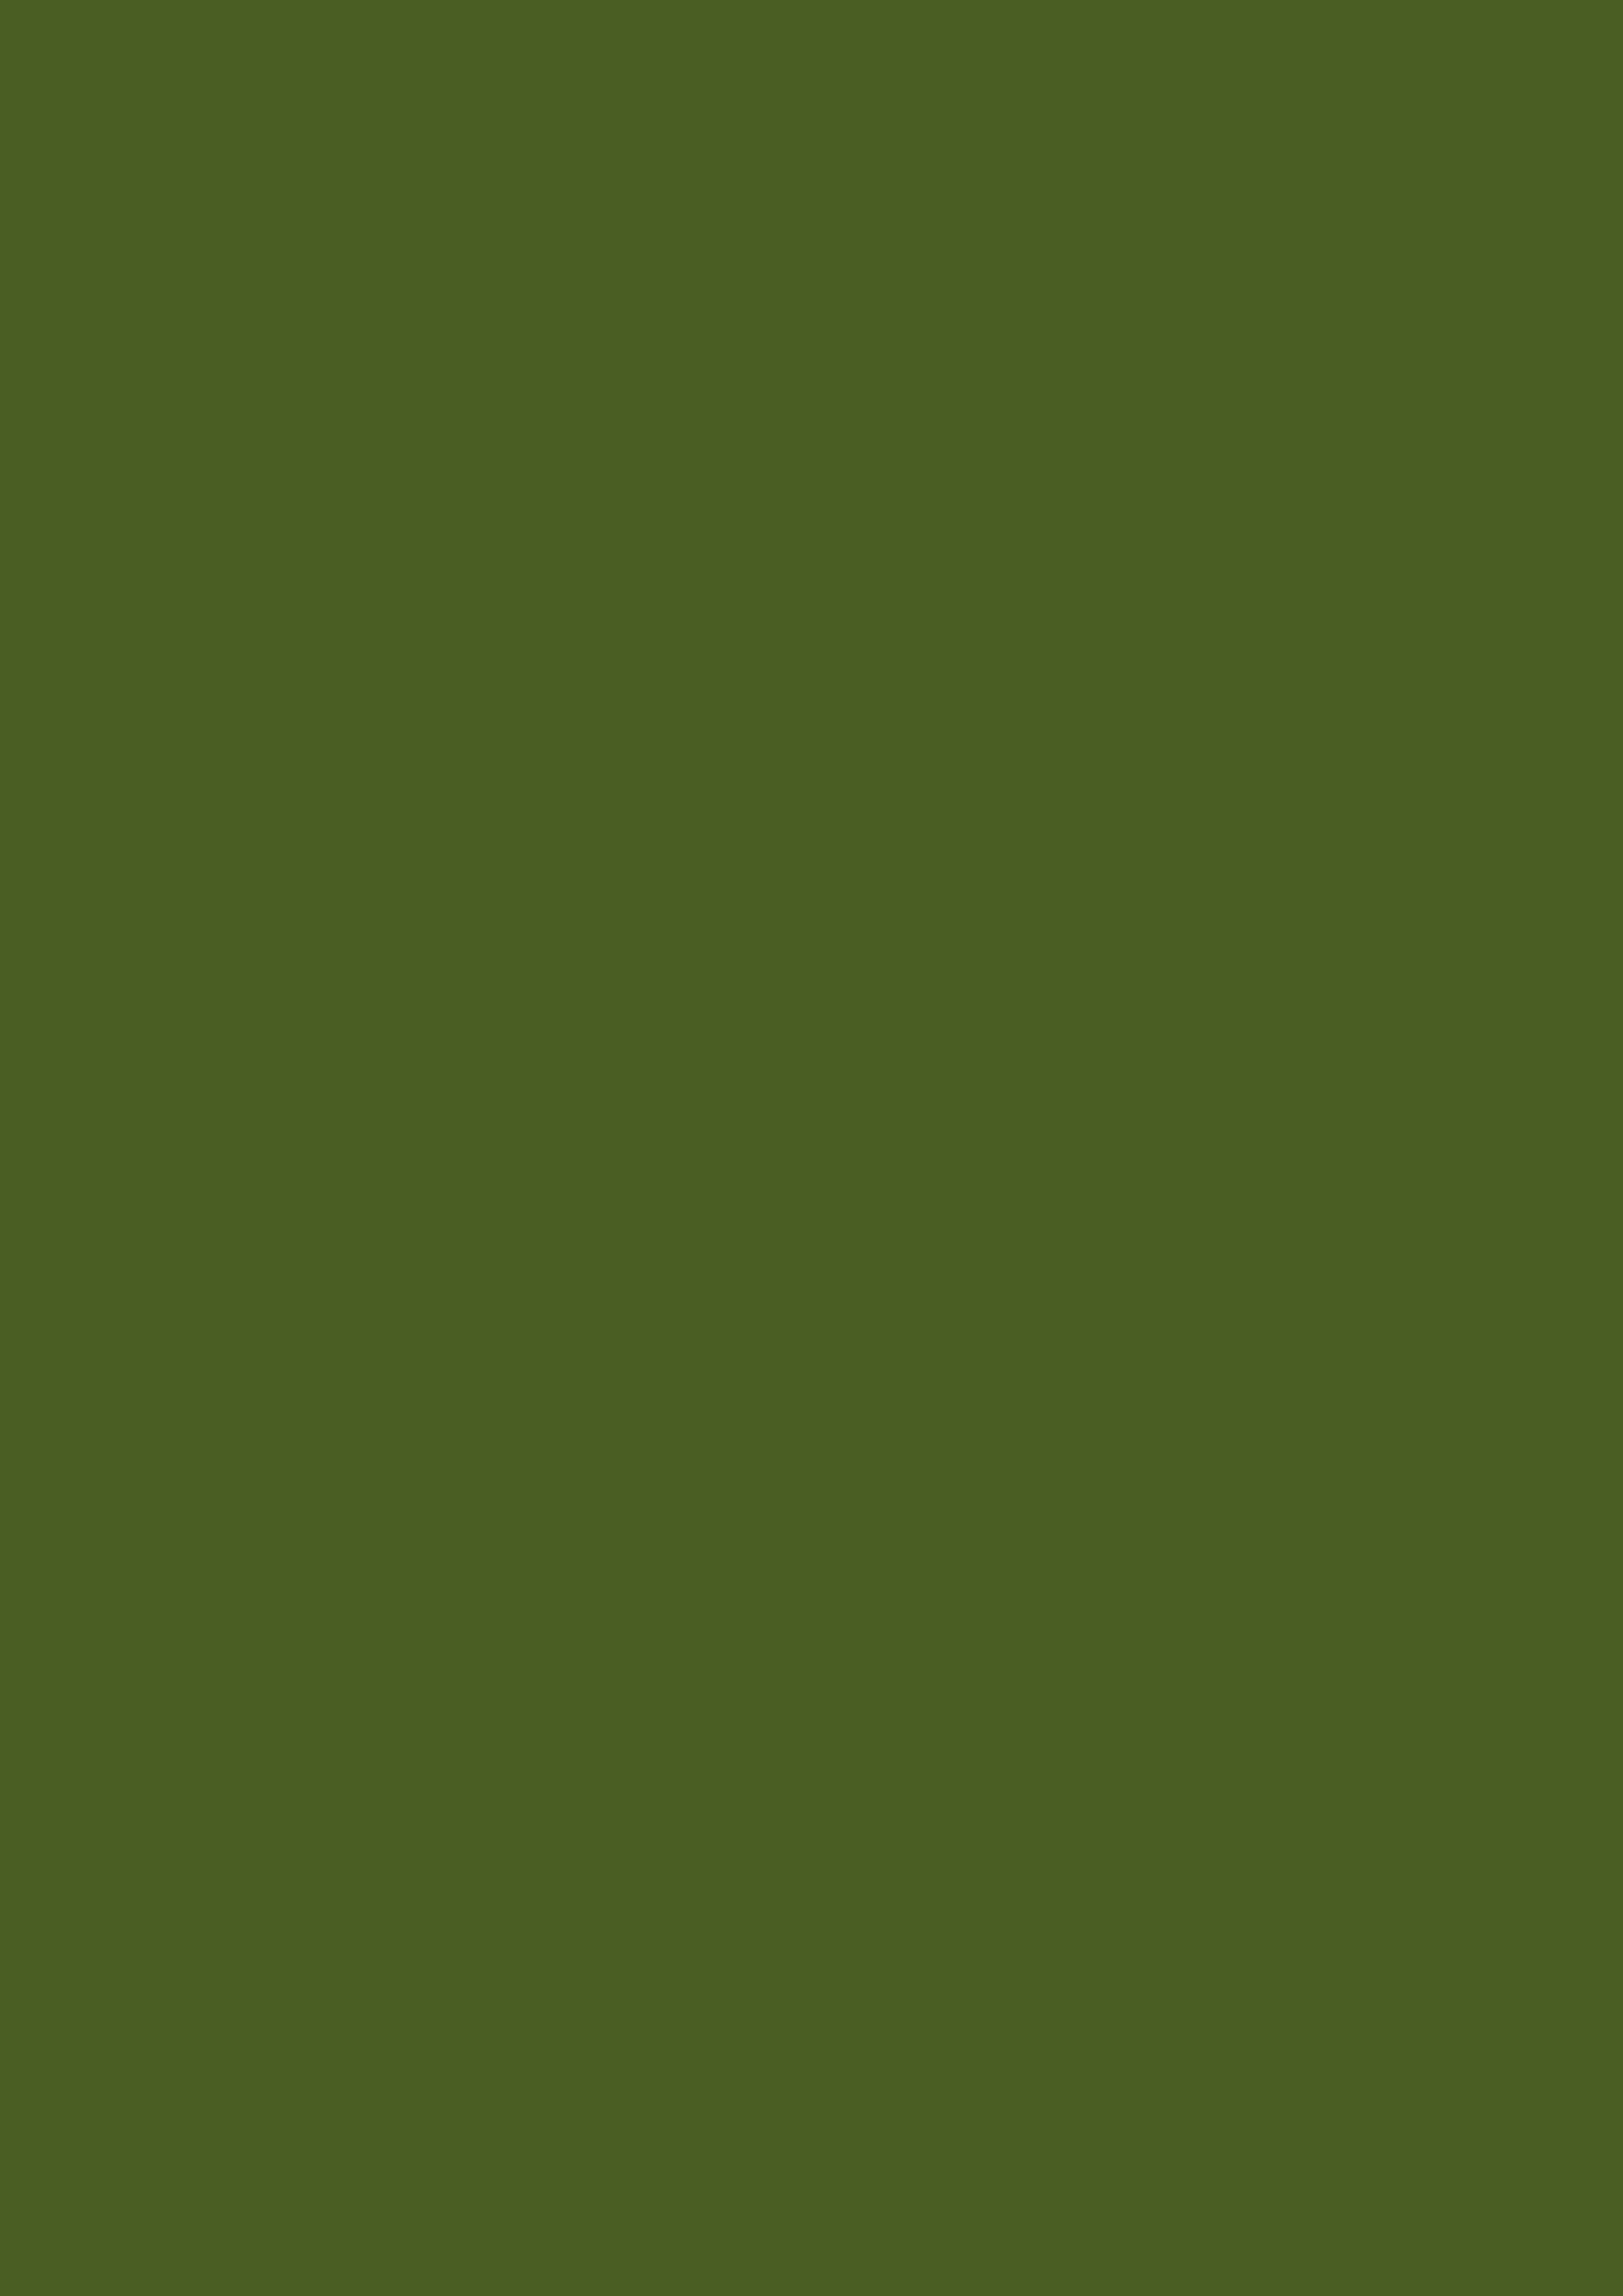 2480x3508 Dark Moss Green Solid Color Background